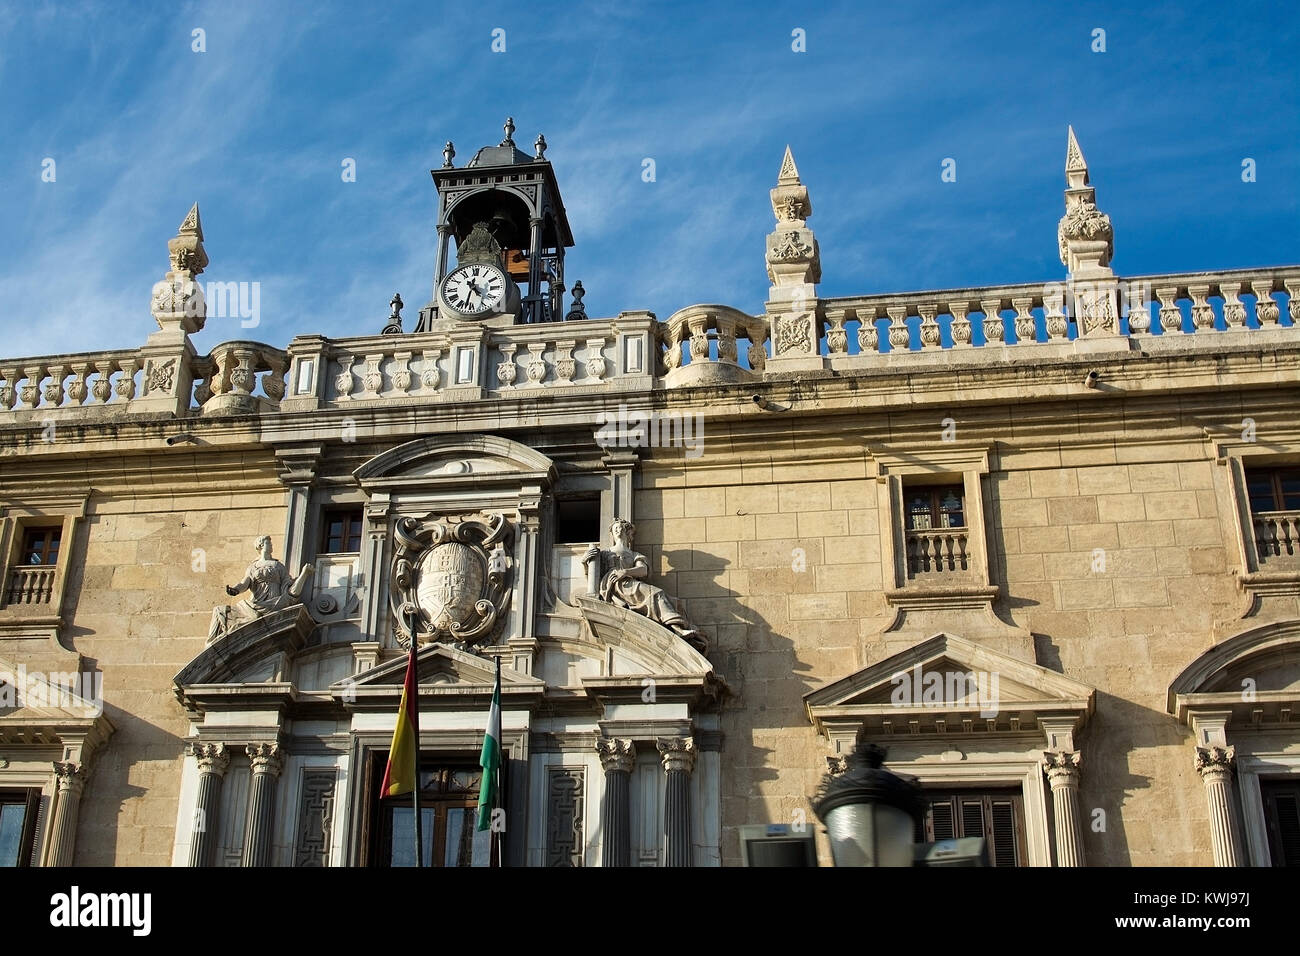 GRANADA, ANDALUCIA, SPAIN - DECEMBER 20, 2017: High Court of Andalusia classical style building on December 20, 2017 in Granada, Andalucia, Spain Stock Photo